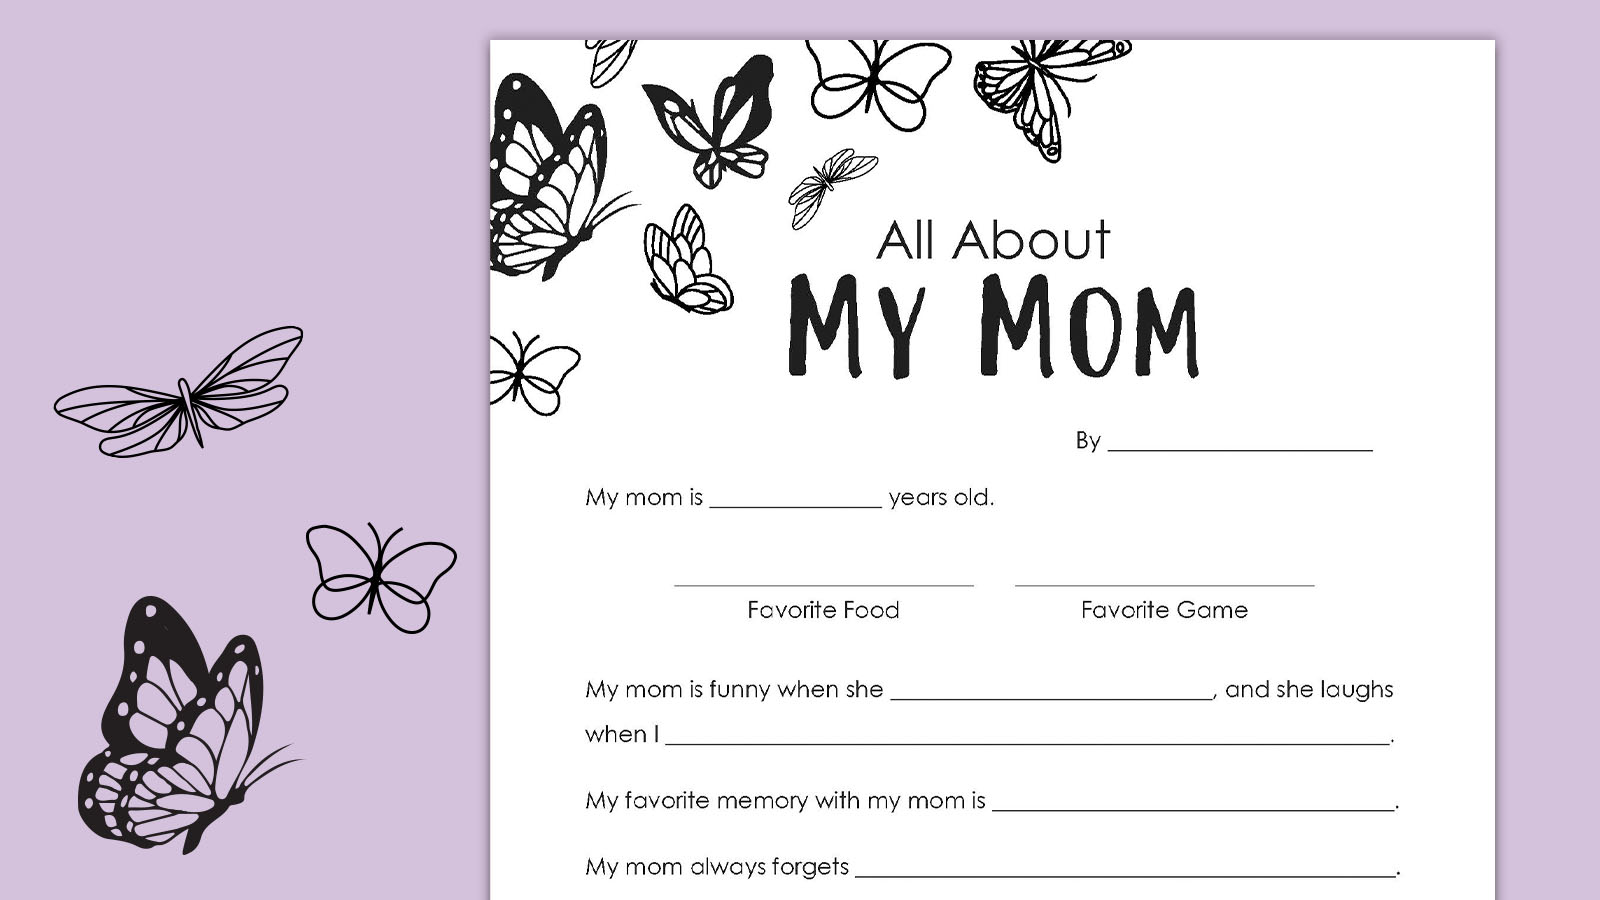 all about my mom printable with questions about moms for mother's day questionnaire